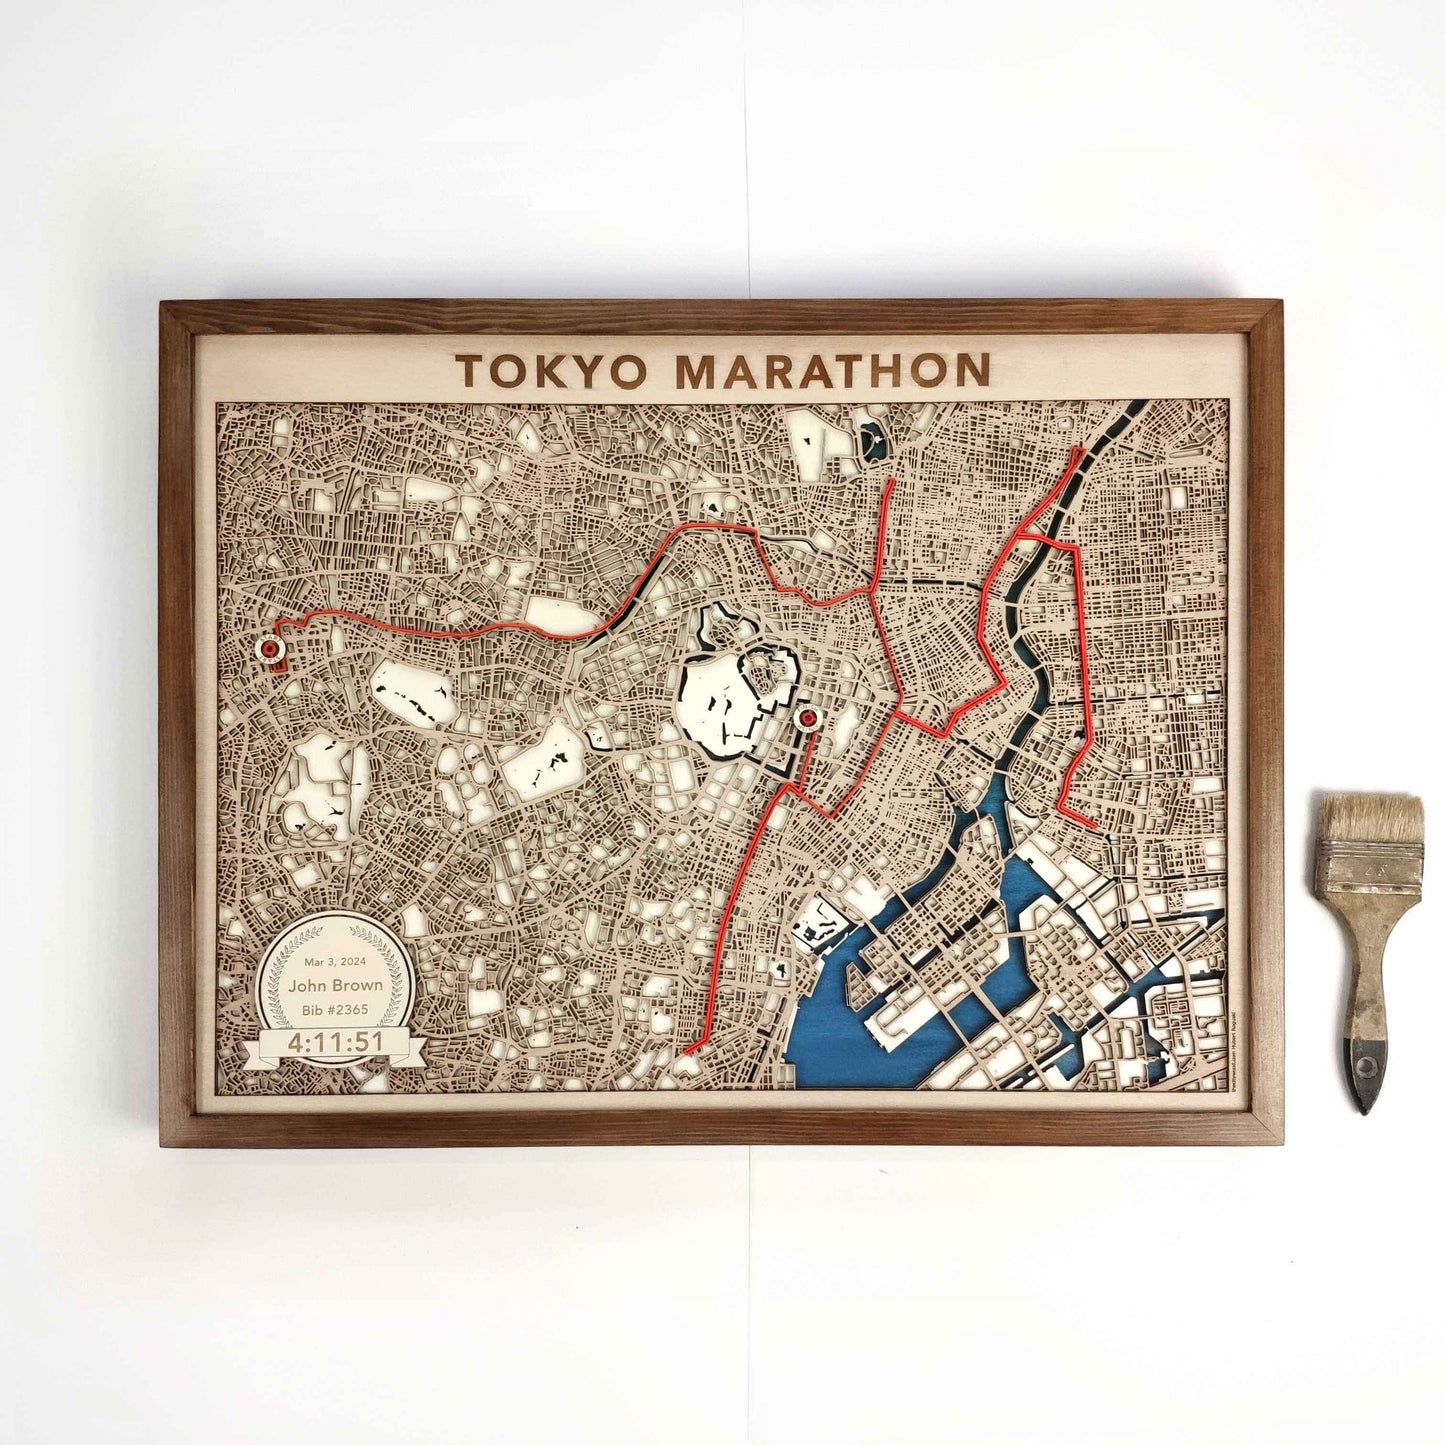 Tokyo Marathon Laser-Cut Wooden Map – Unique Runner Poster Gift by CityWood - Custom Wood Map Art - Unique Laser Cut Engraved - Anniversary Gift